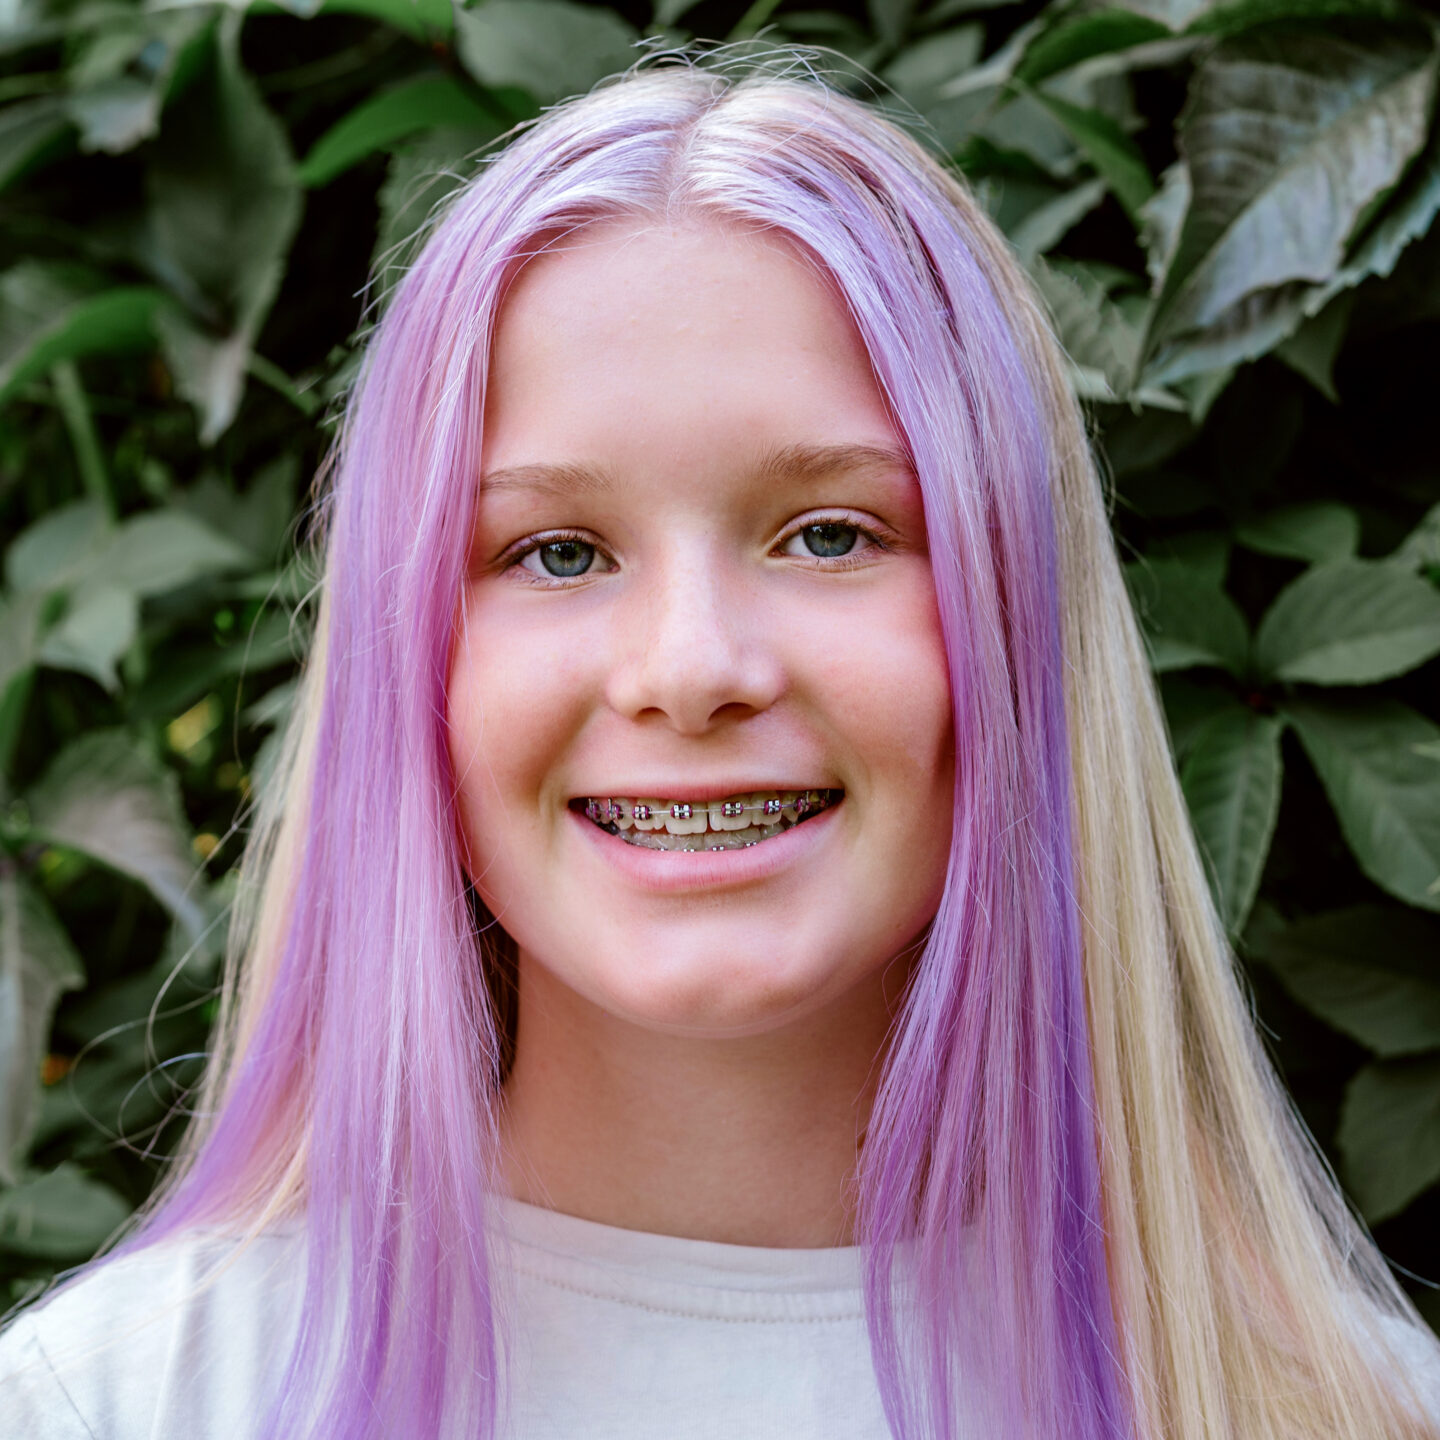 LGBTQ young person with braces smiling.